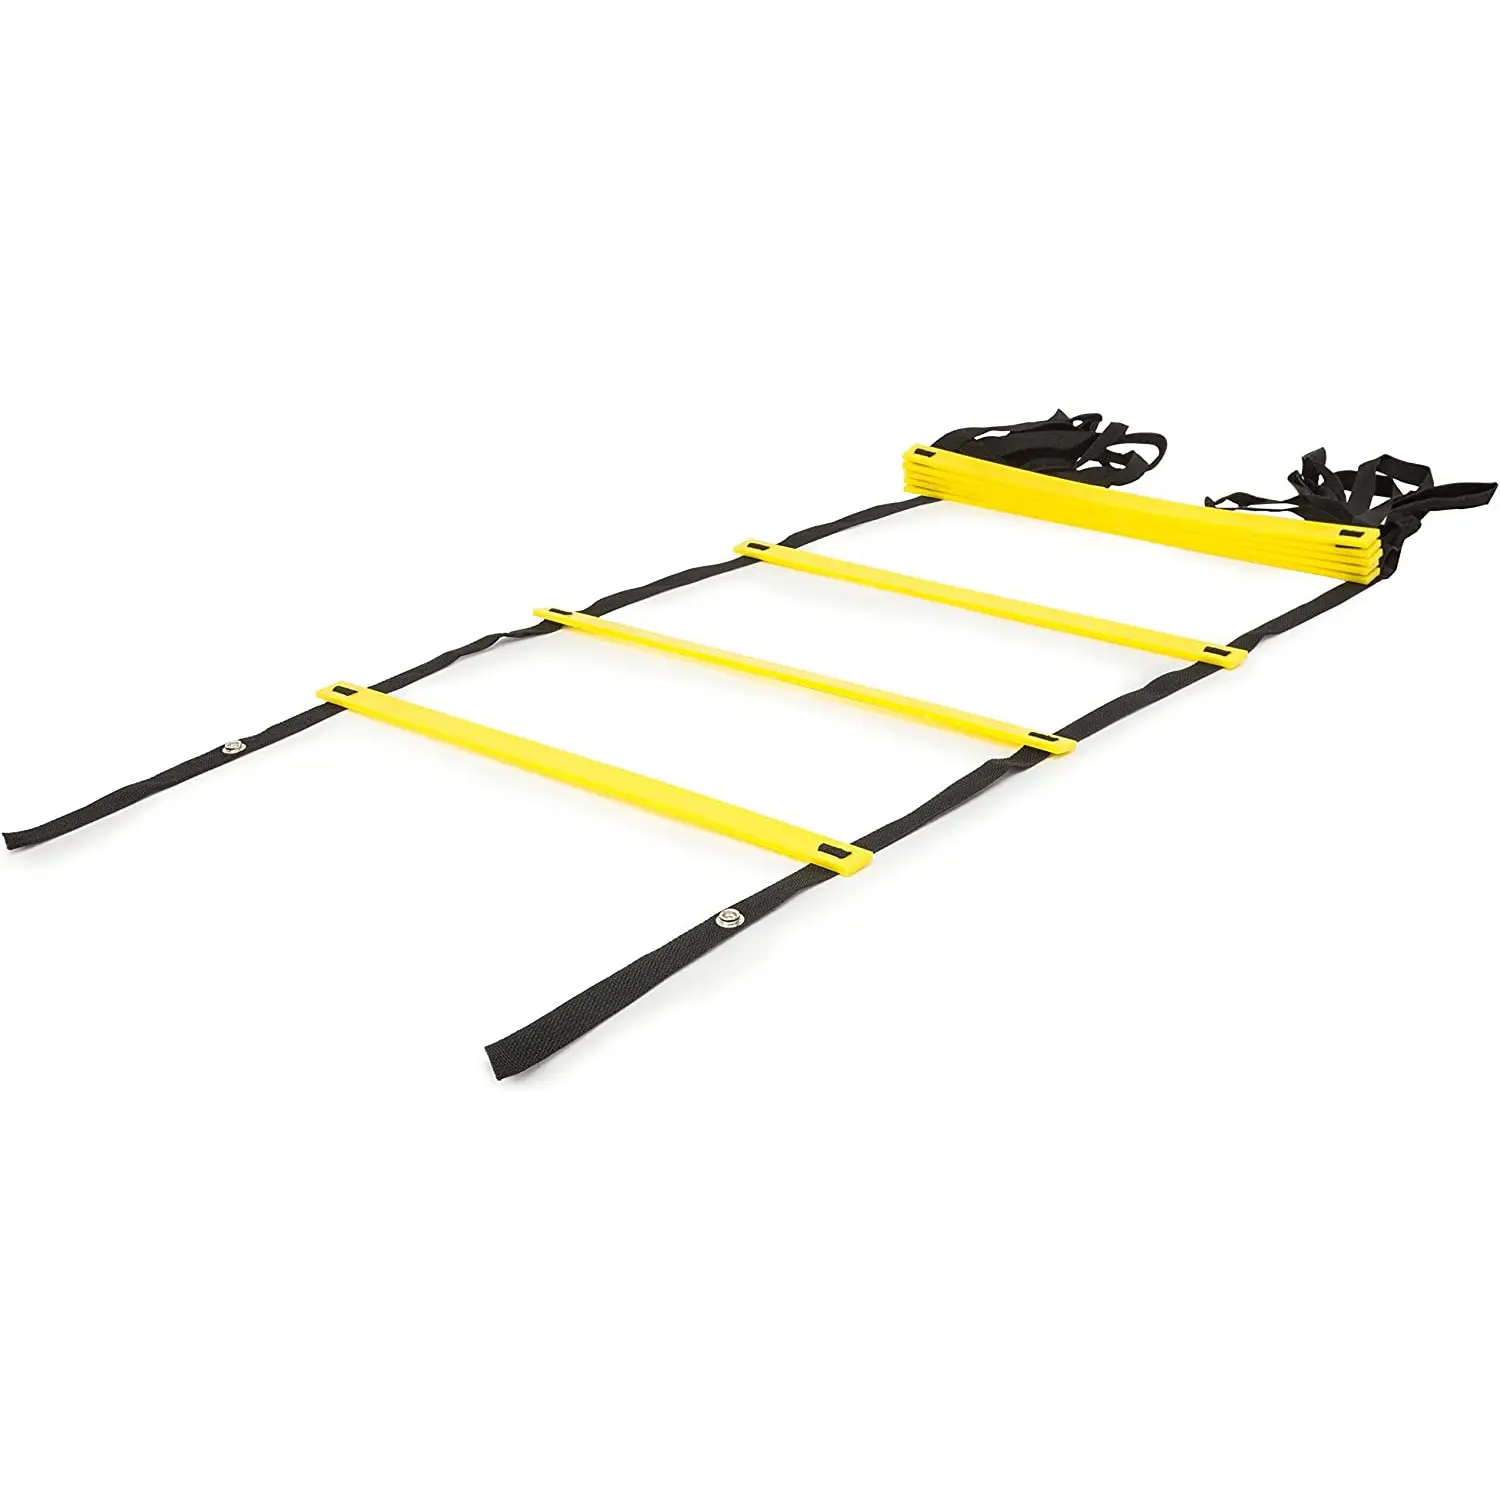 7 Meters 13 Rungs Agility Ladder Speed Ladder Training Ladder For Soccer Football Basketball Trainers Feet Training Equipment